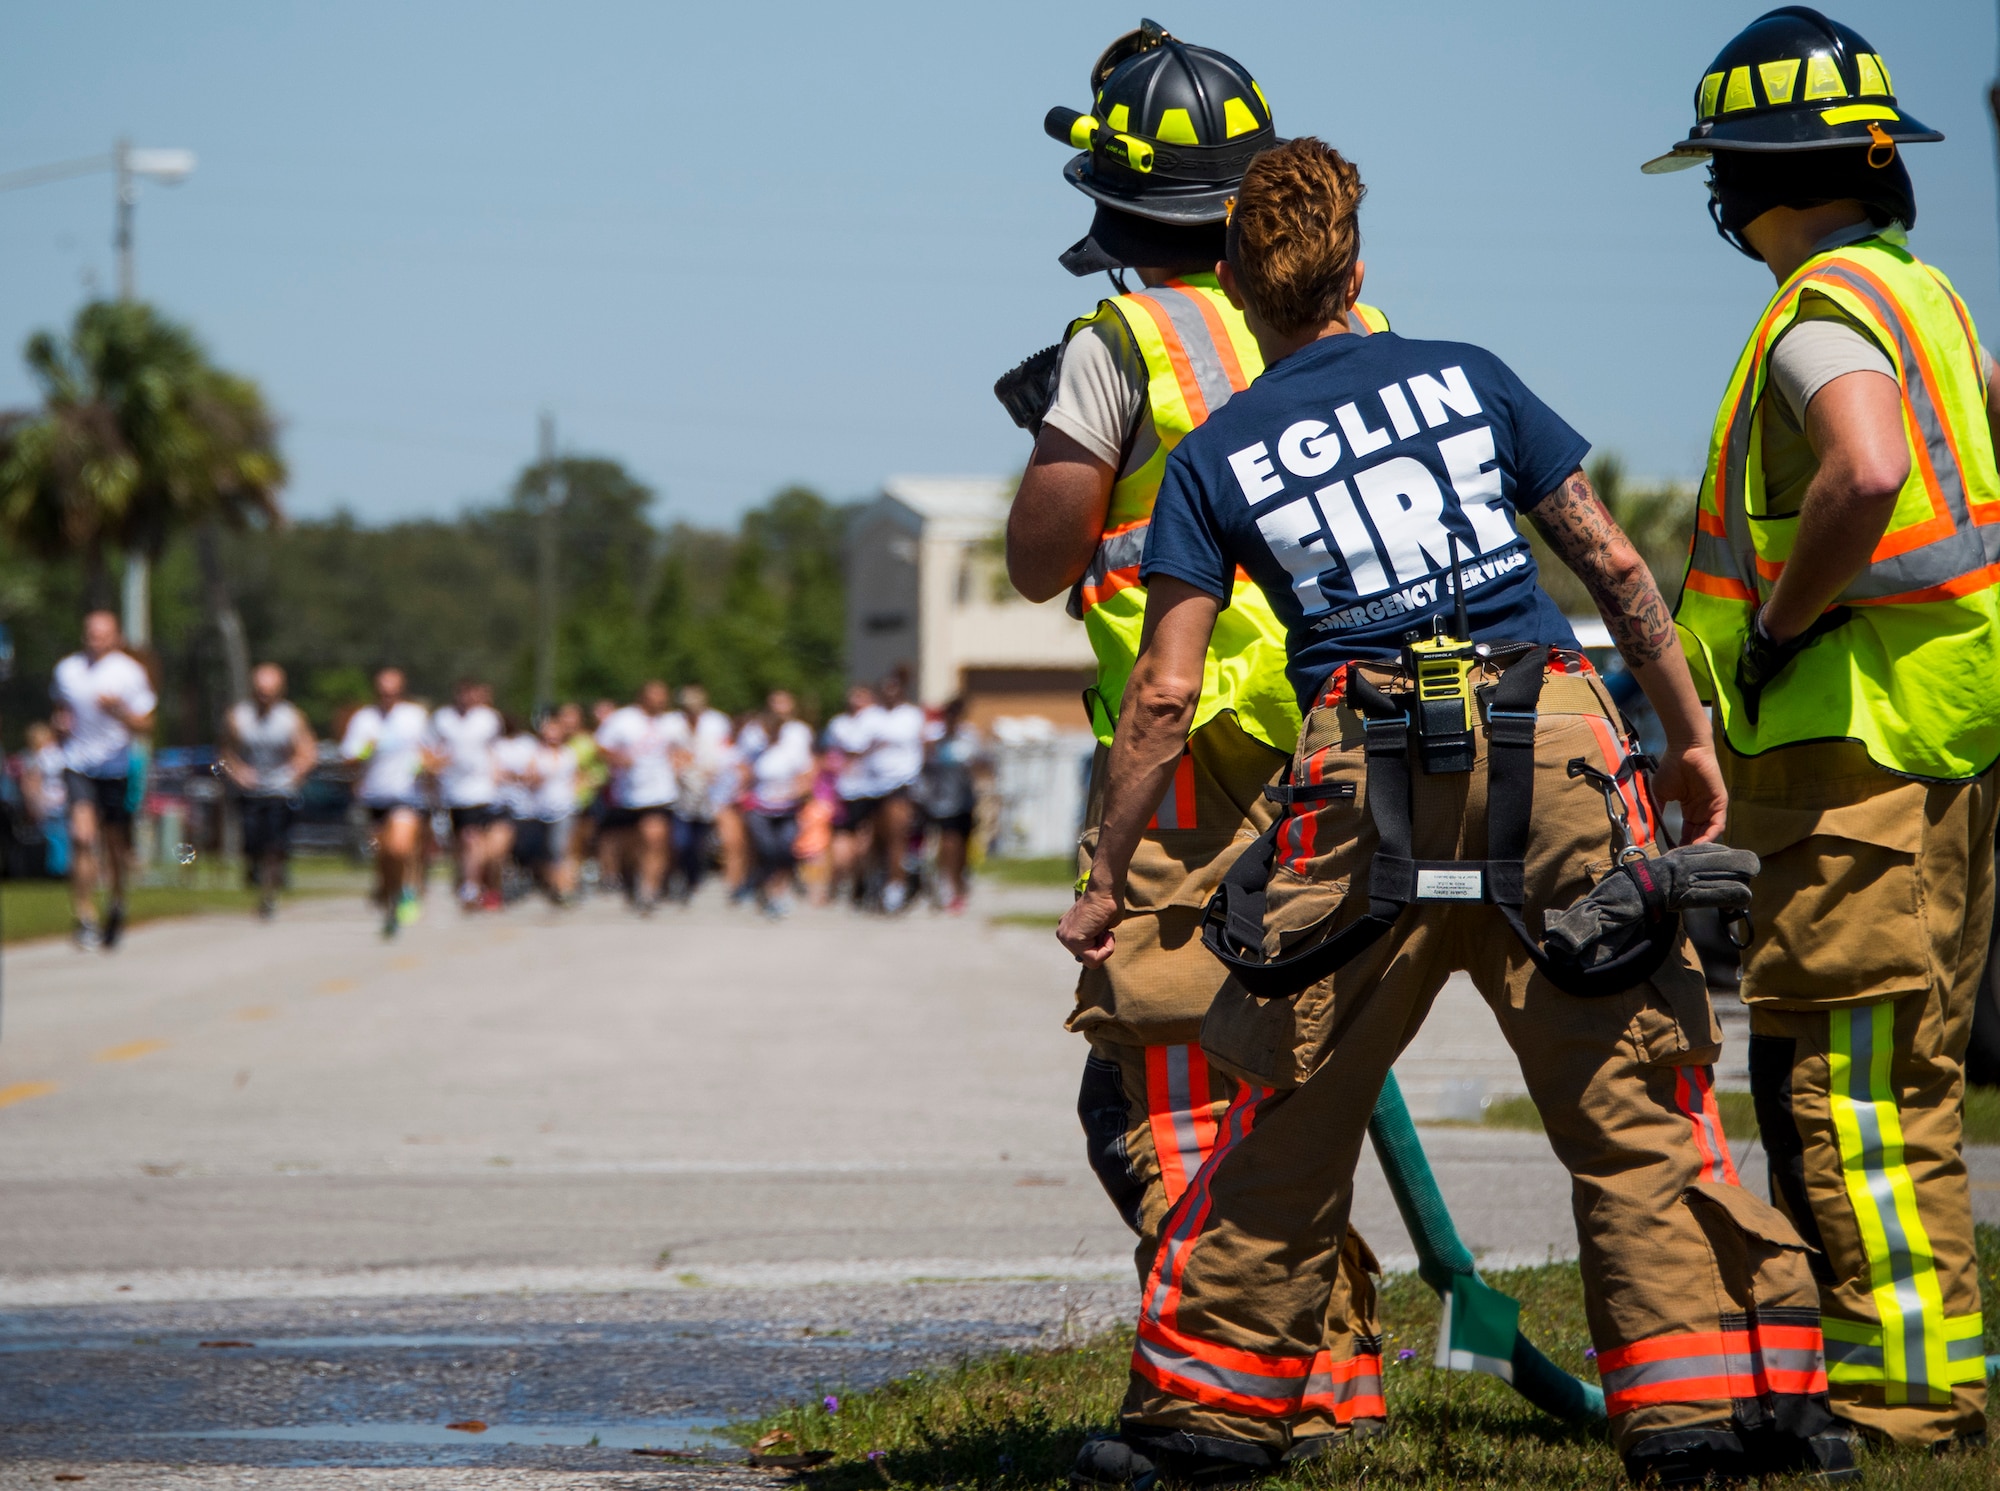 Firefighters prepare to soak participants with water during the 4th annual Color Me Aware Fun Run April 6 near the Civil Engineer Pavilion at Eglin Air Force Base, Fla. The run is held to raise sexual assault awareness. (U.S. Air Force photo/Ilka Cole)